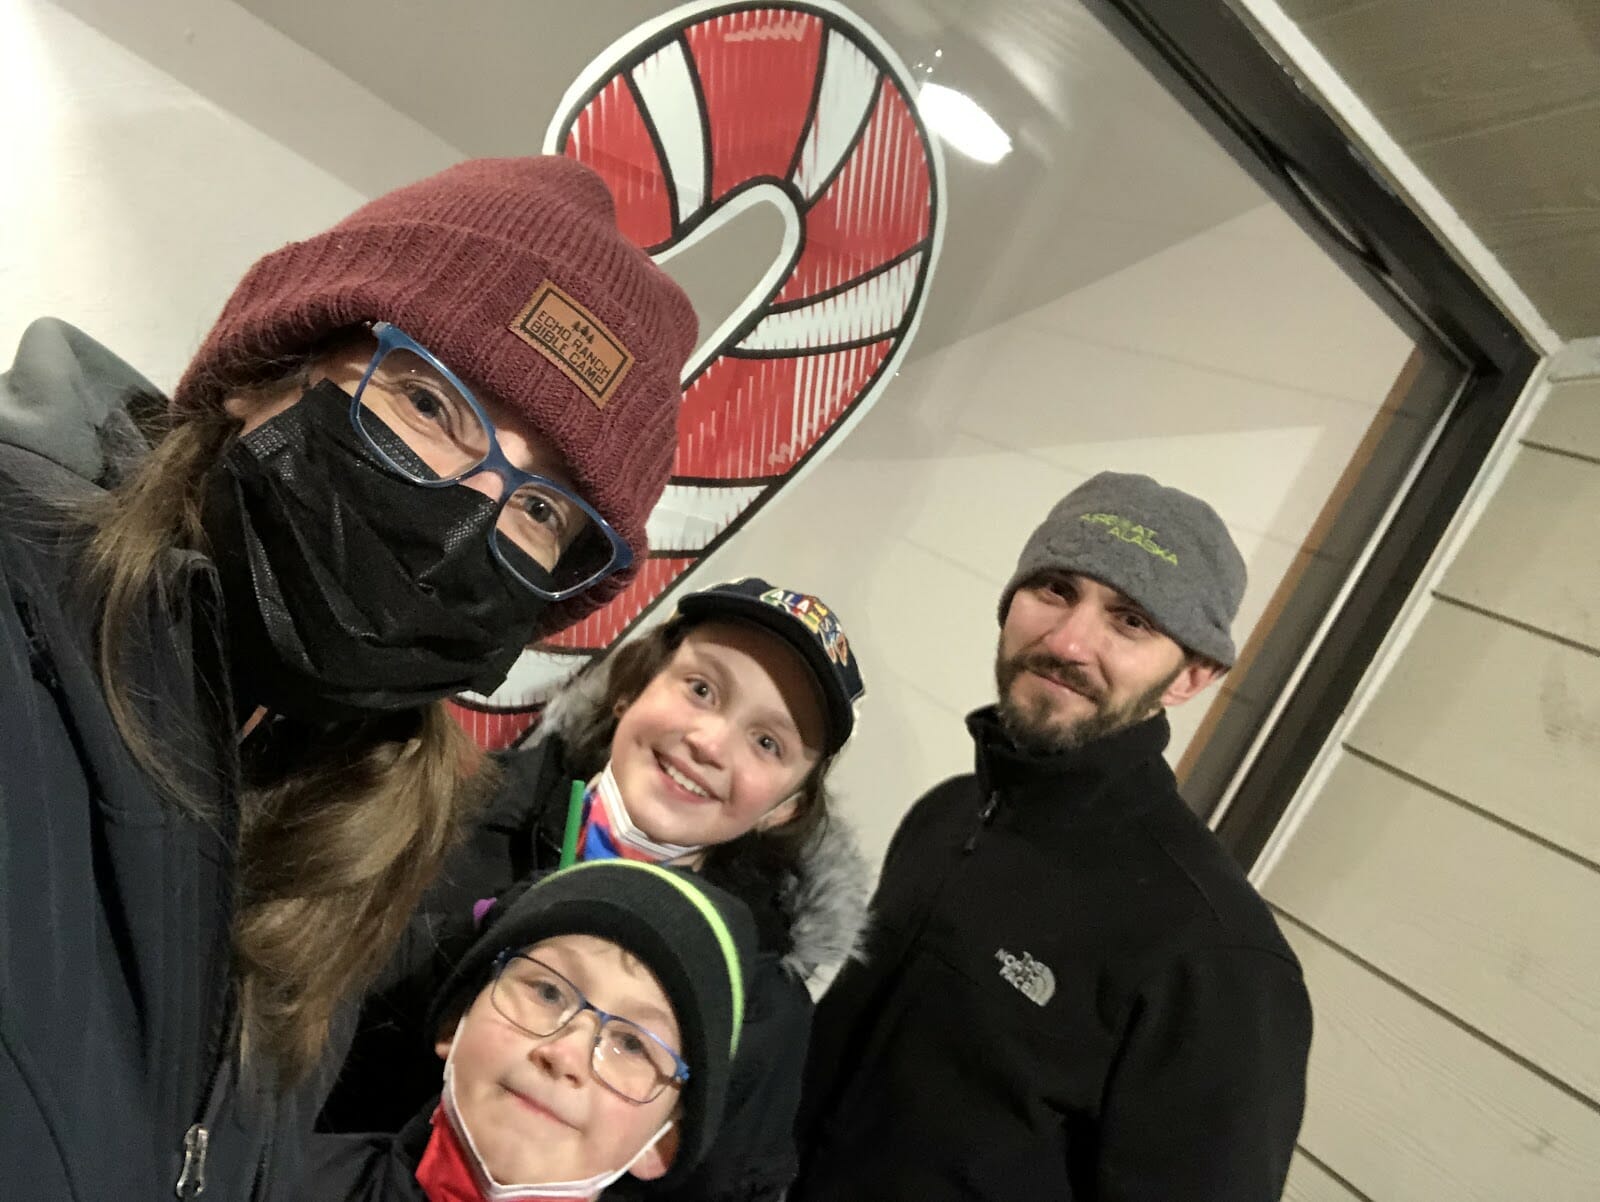 A family selfie in front of a giant candy cane in the window.